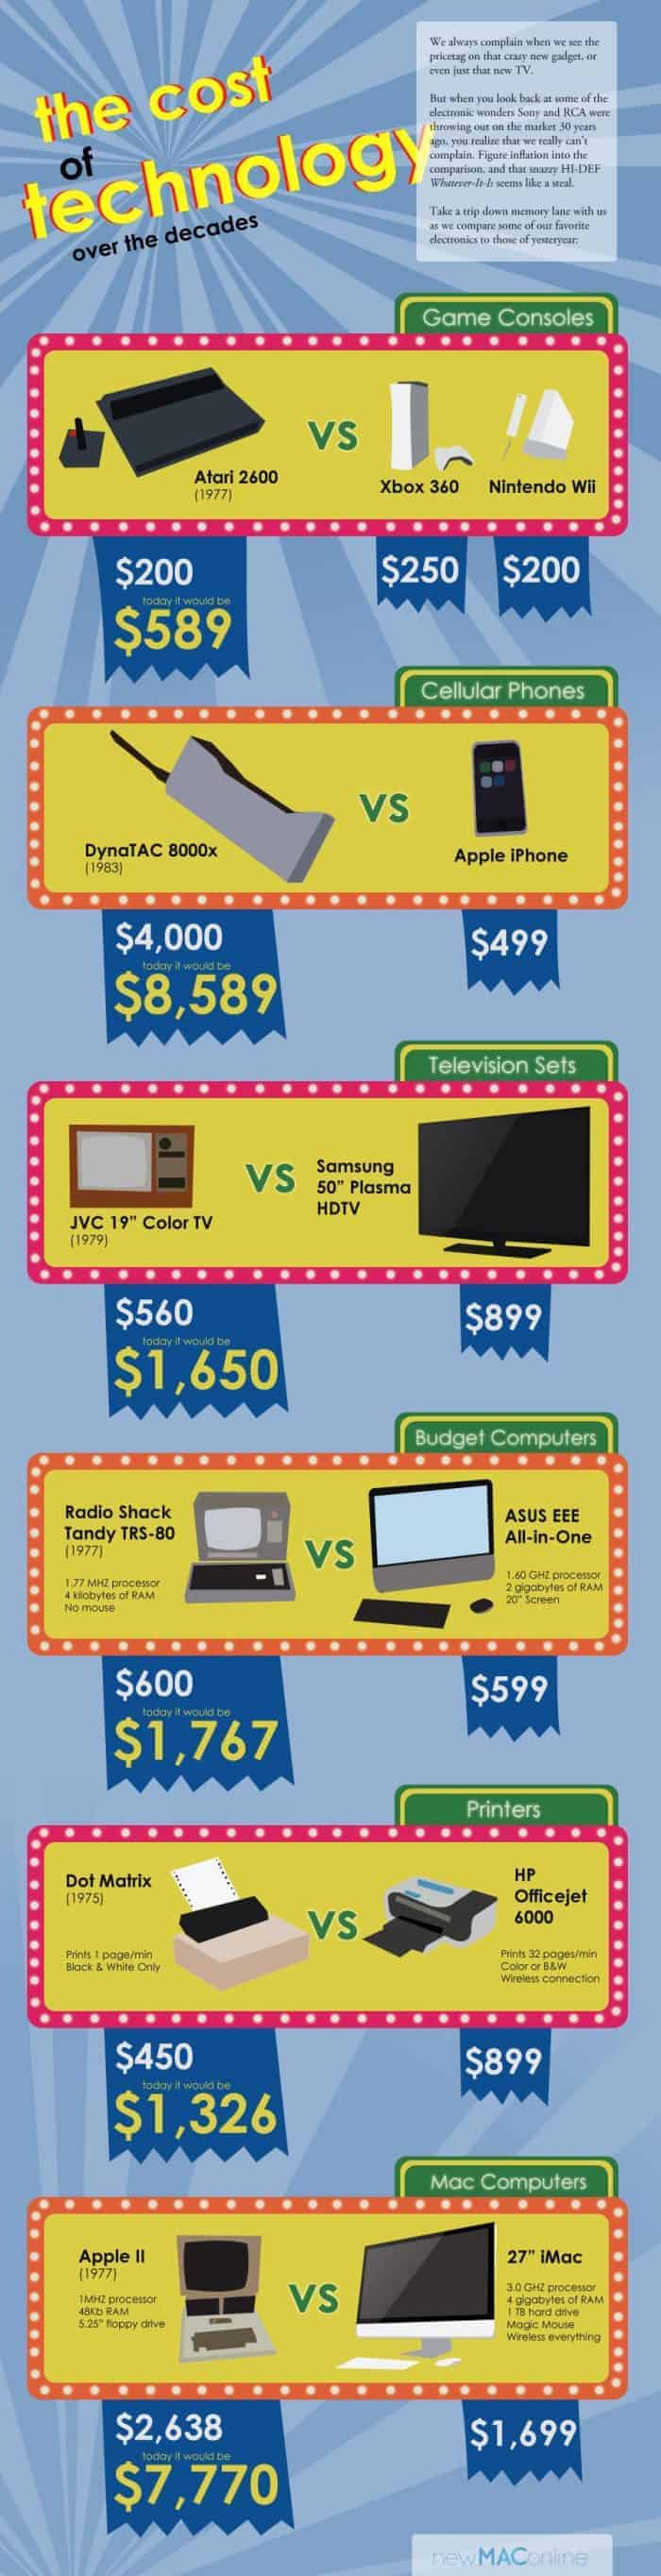 Cost of Technology Over The Decades Infographic